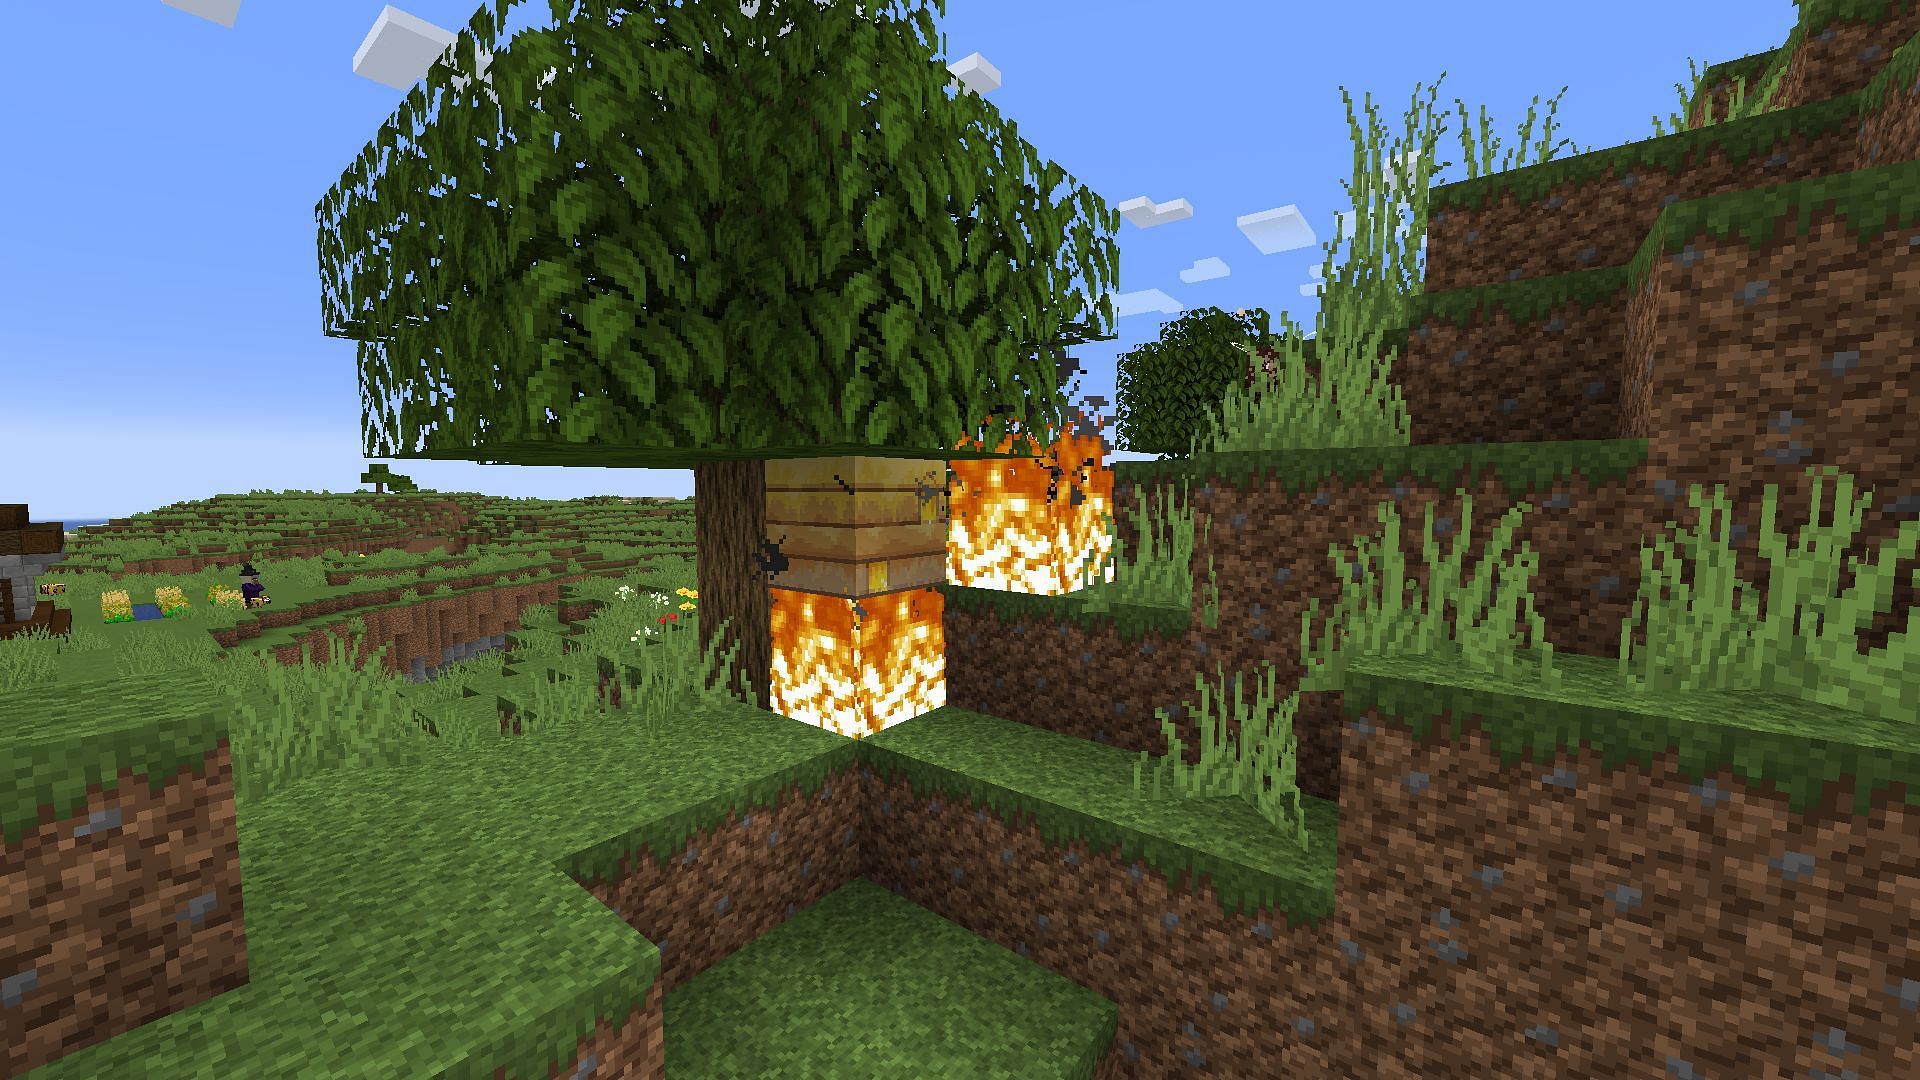 Fire being used to keep bees calm (Image via Minecraft)